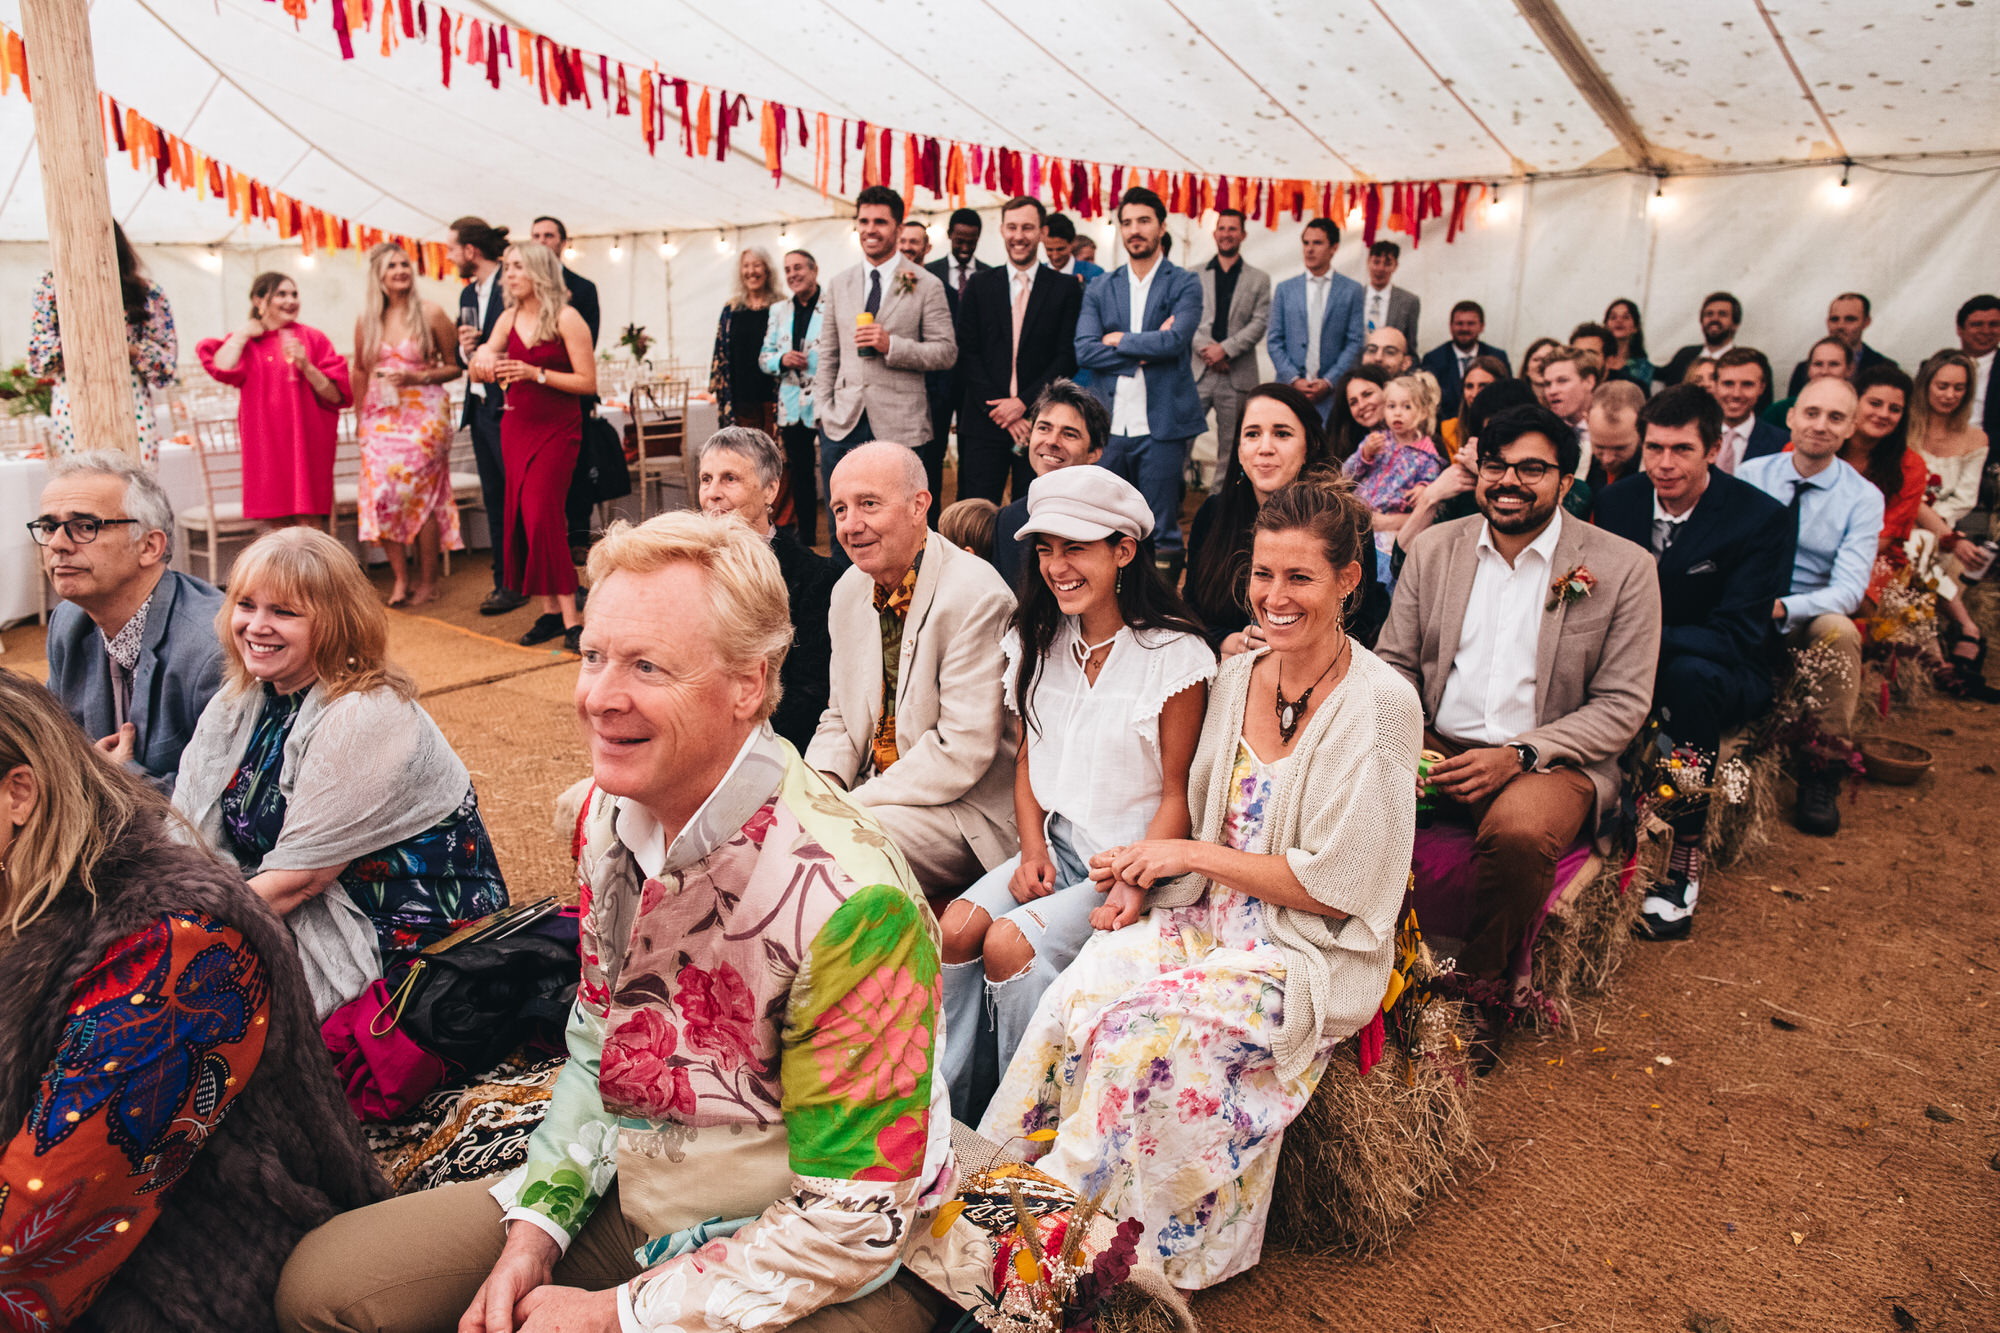 laughing wedding guests sitting on hay bales